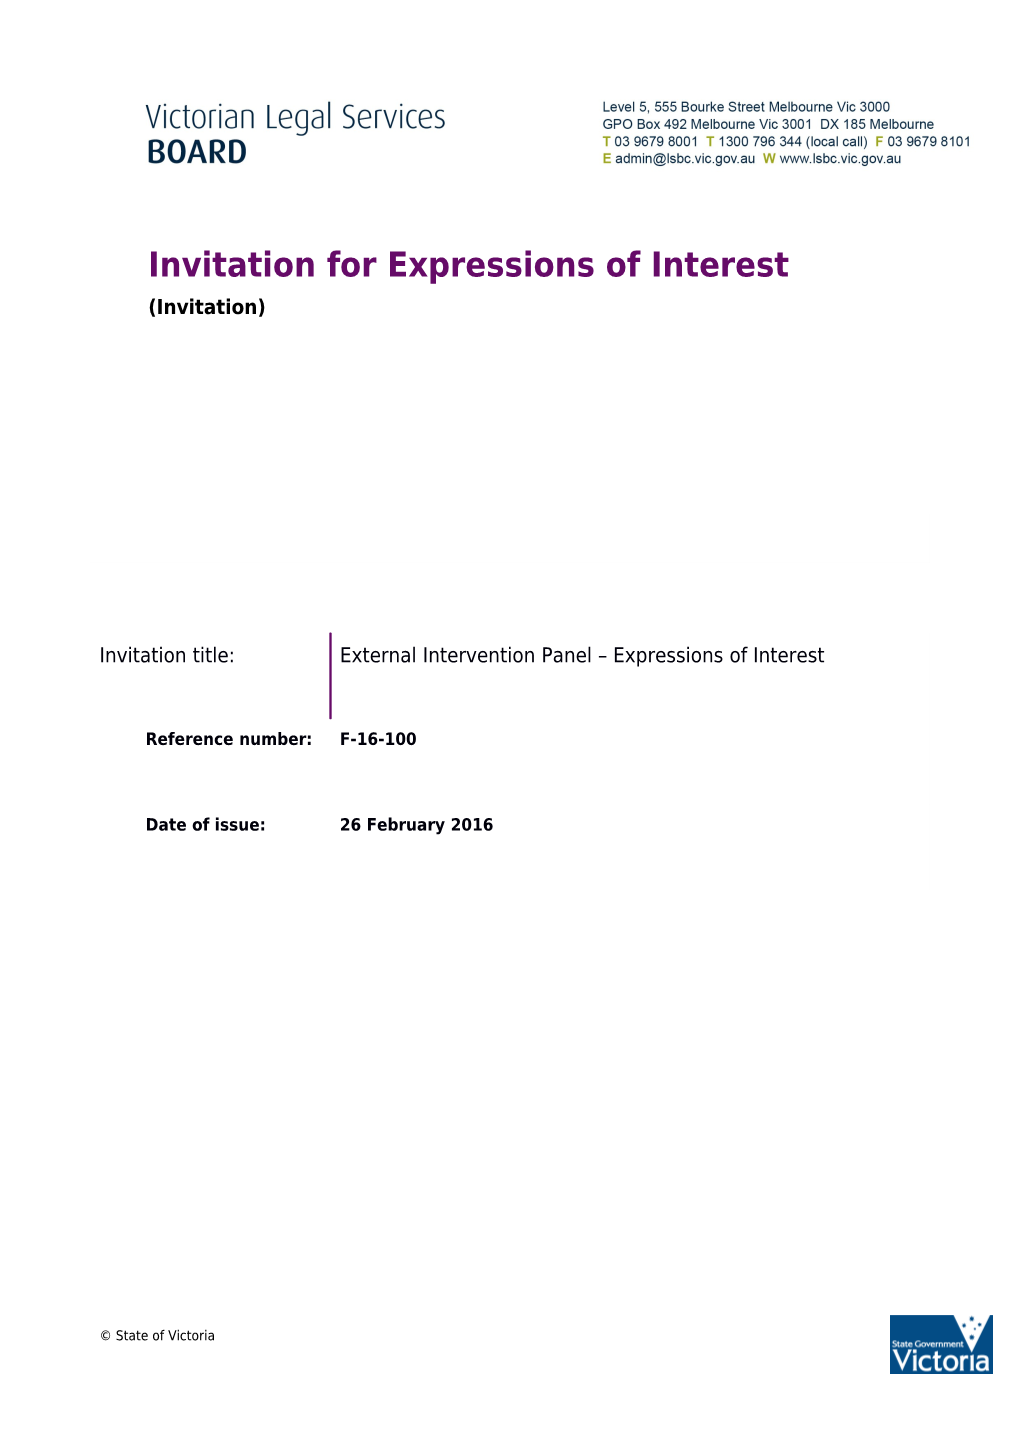 Invitation for Expressions of Interest